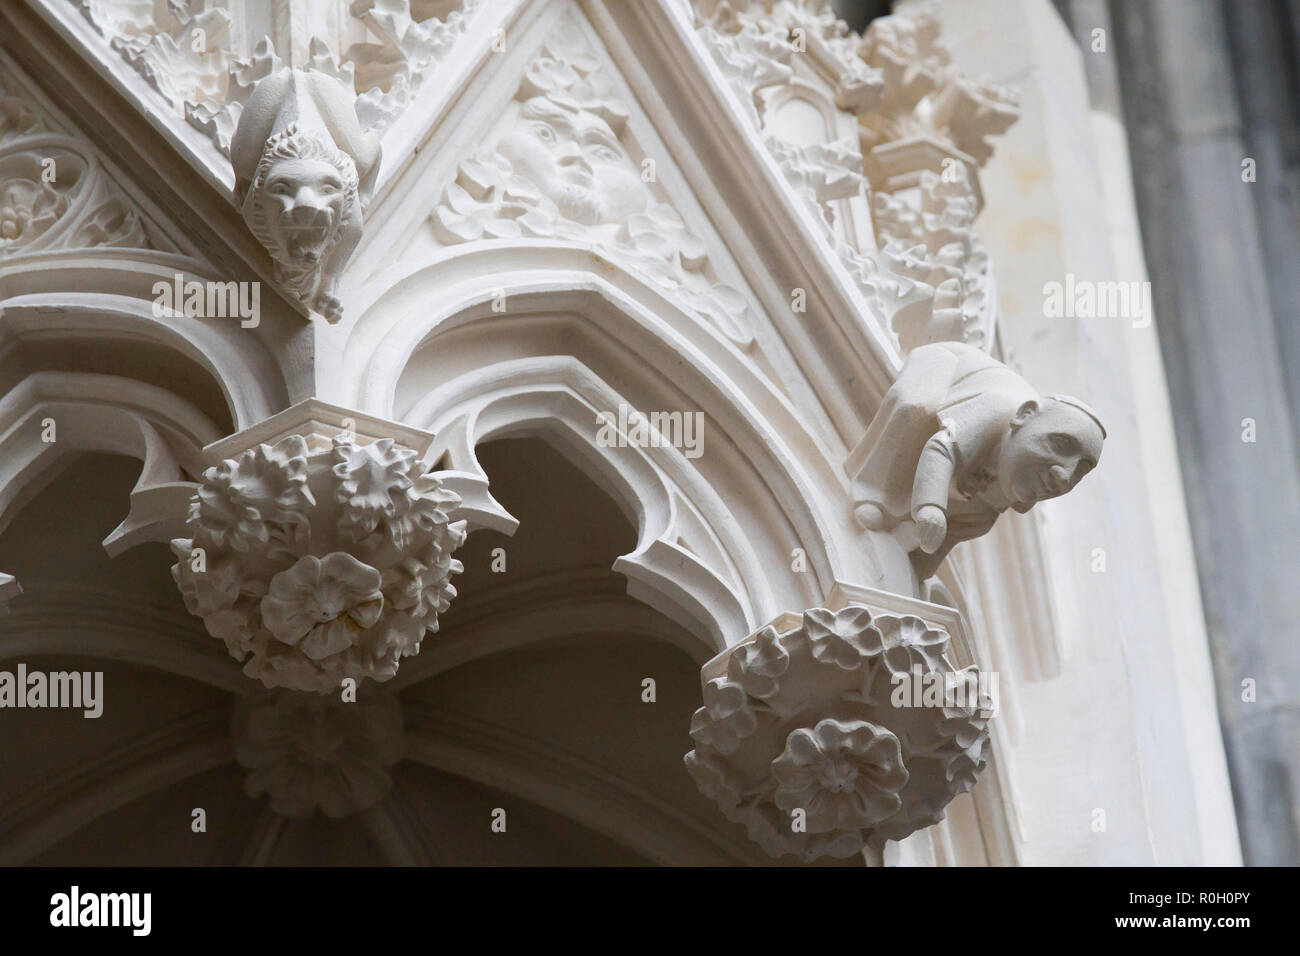 Pope Francis (right) as a small ornamental gargoyle on a baldachin at the main portal of the cathedral, Cologne, Germany.  Papst Franziskus (rechts) a Stock Photo